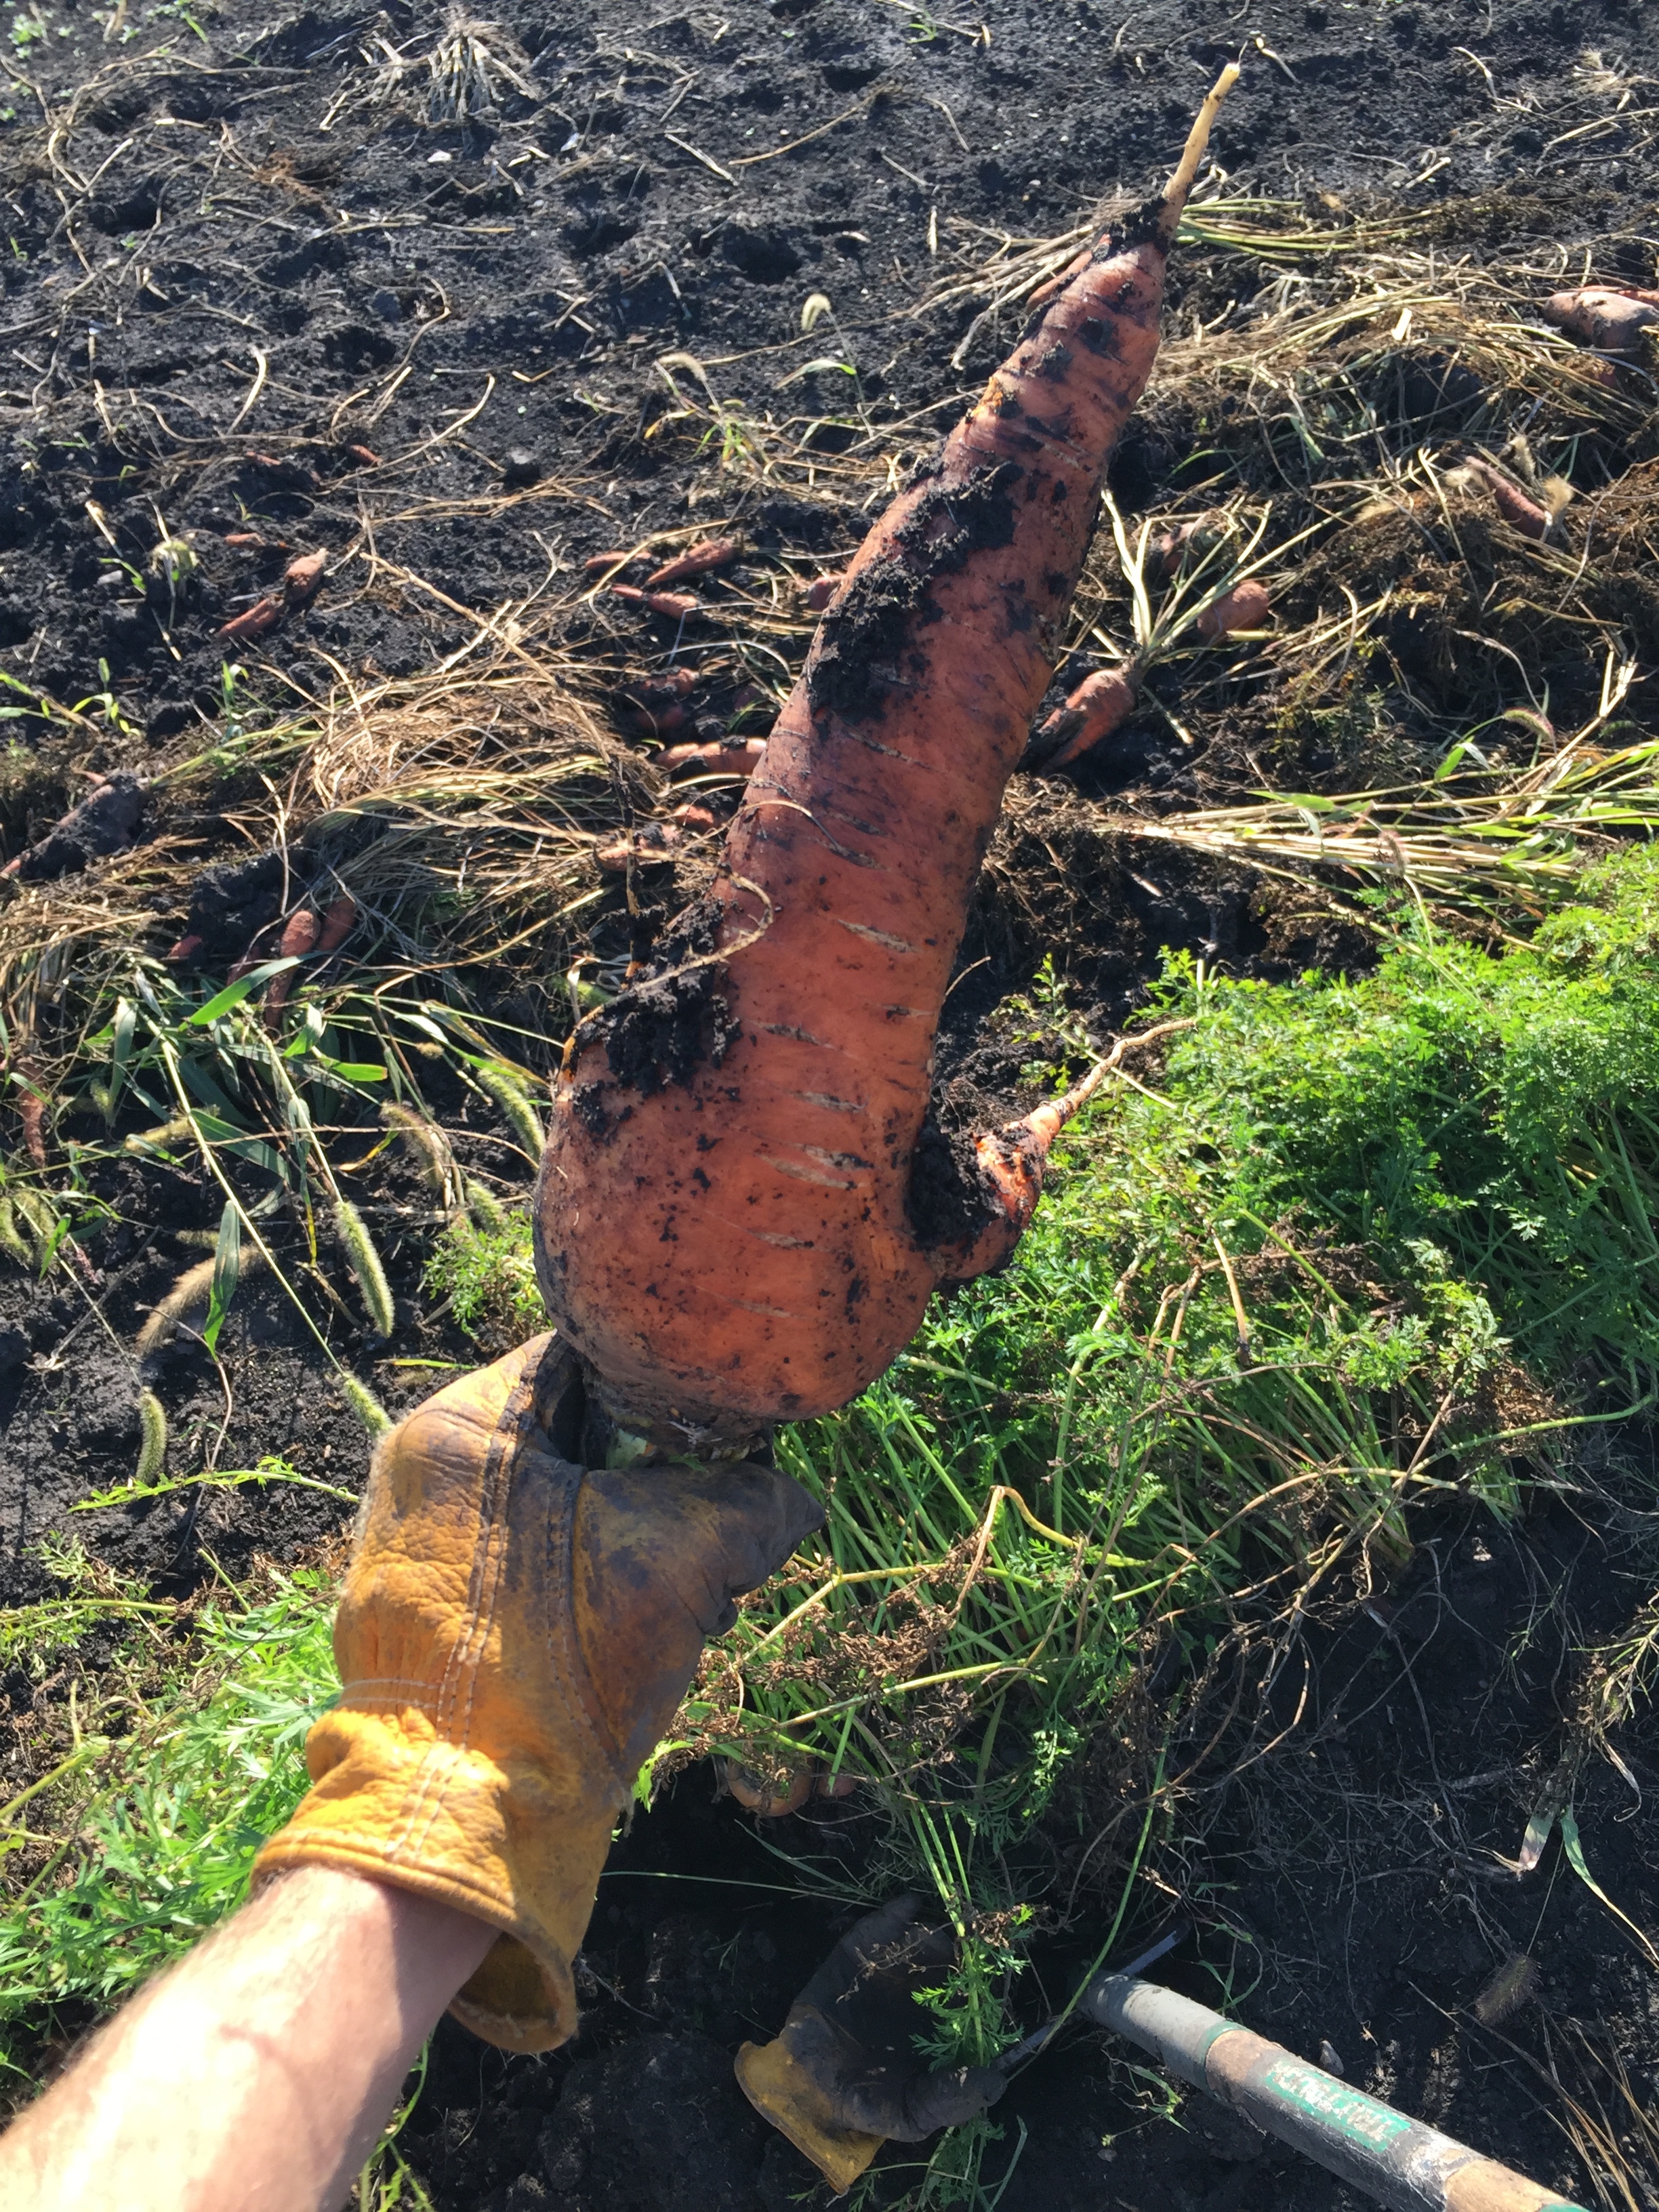  I think this is the biggest carrot I've ever seen. 